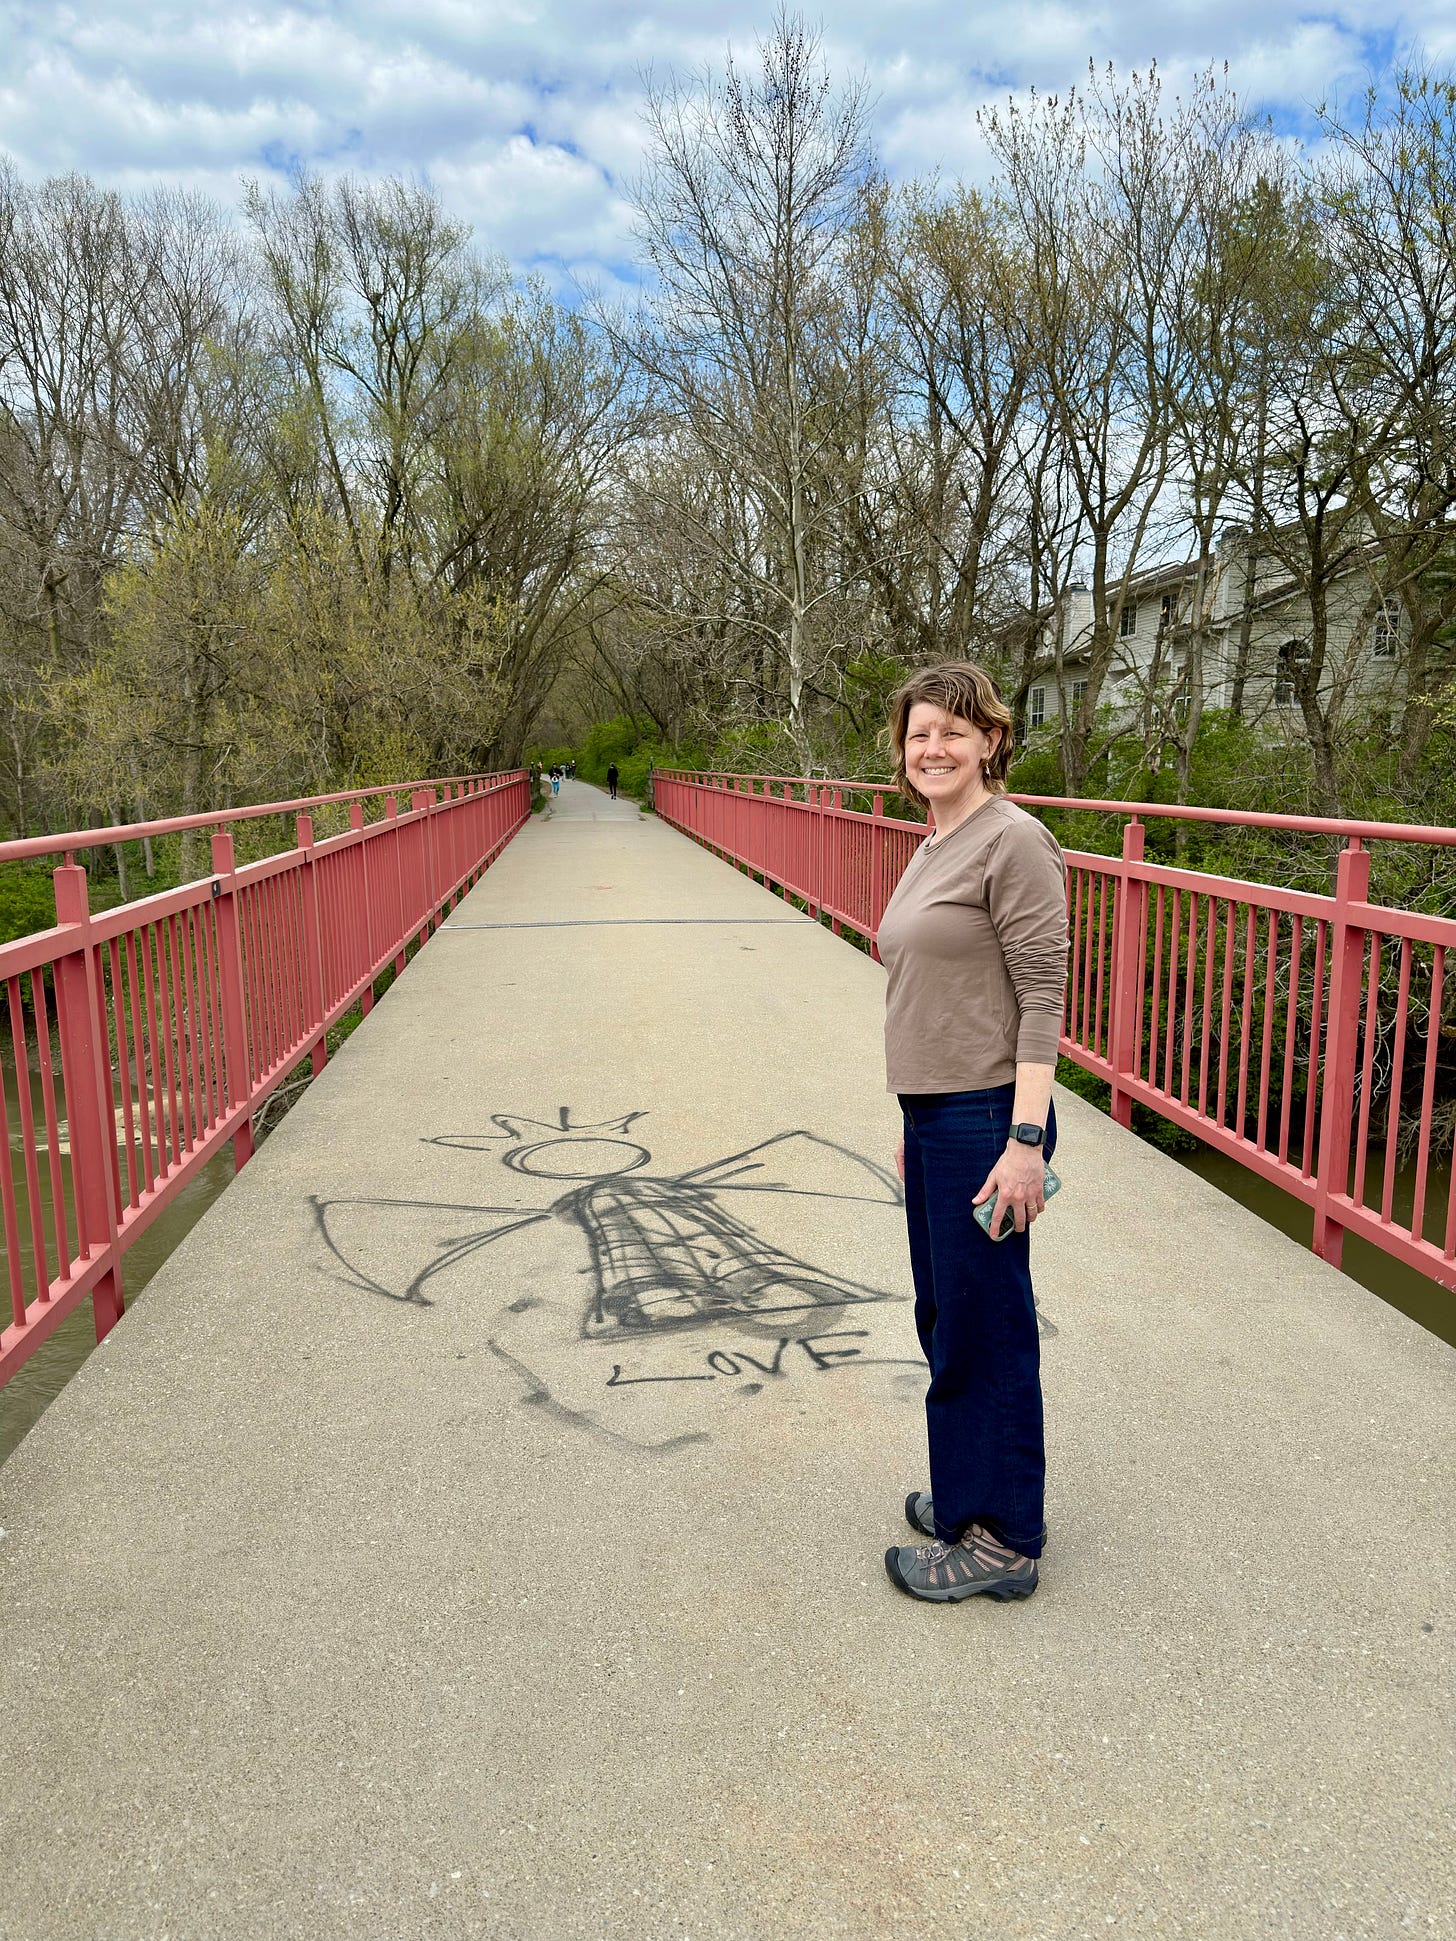 Heidi standing on a paved bike trail in front of an angel graffiti painted in black on the cement at her feet.